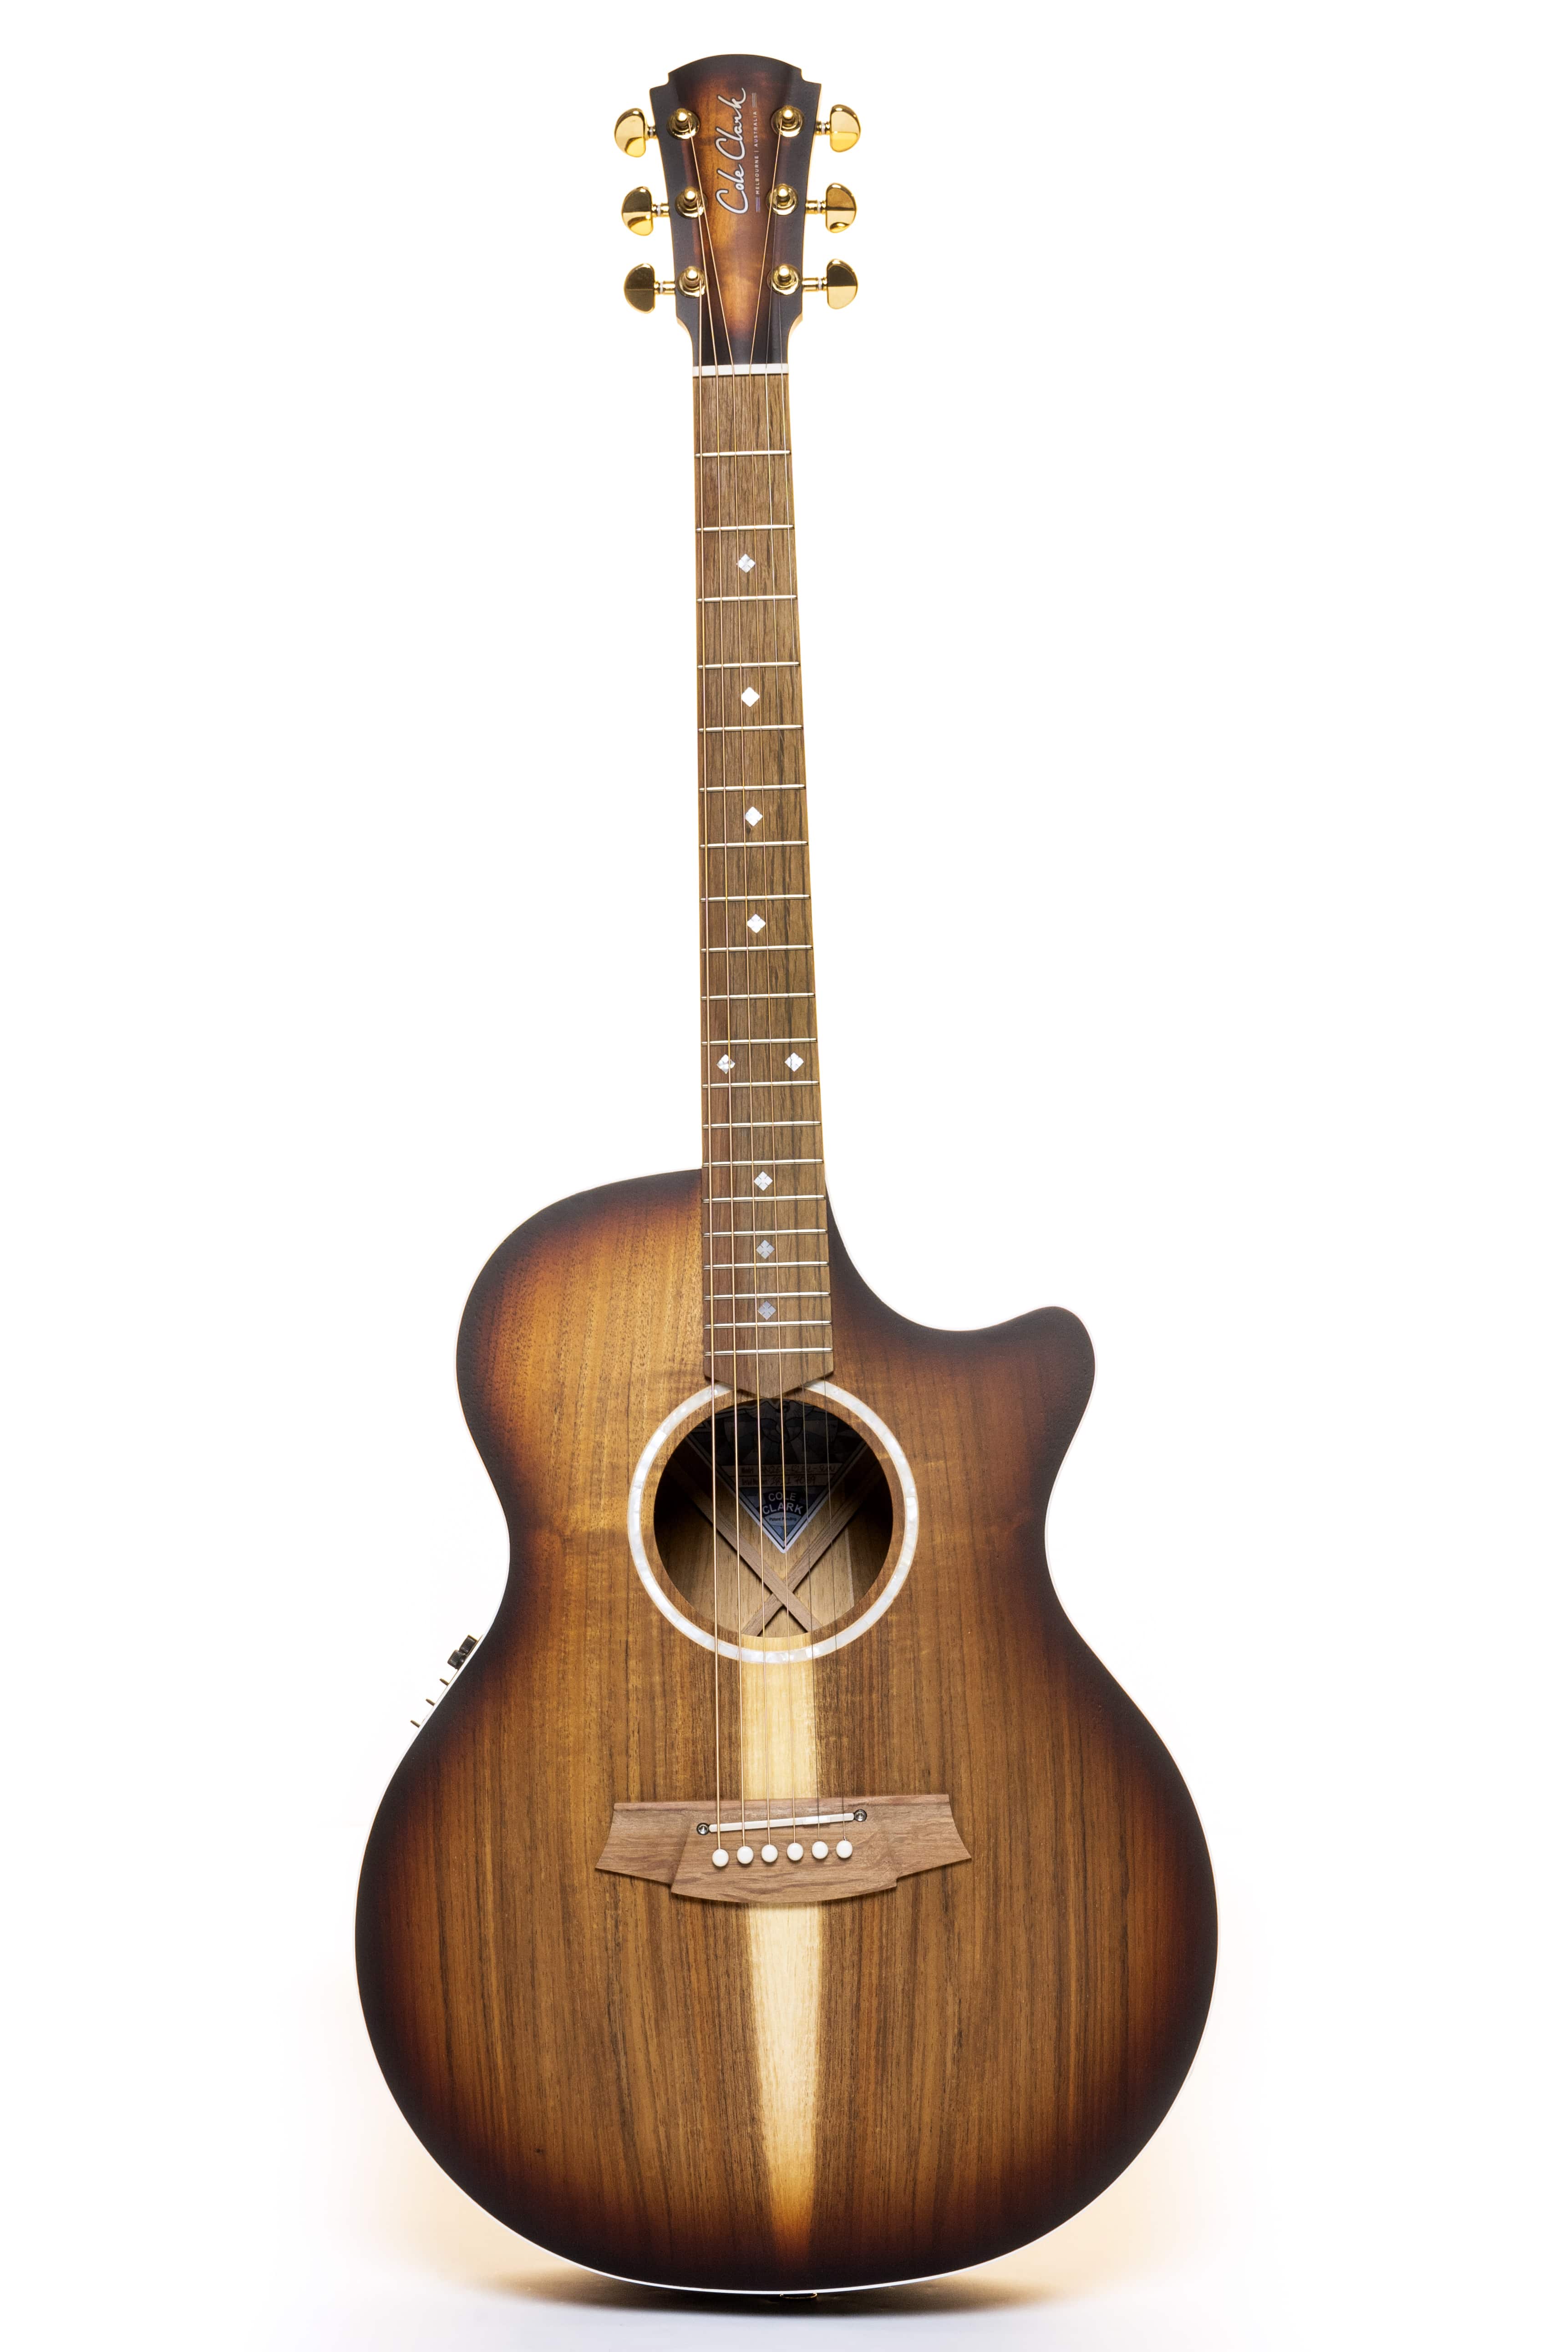 Cole Clark USA to Release Three New Guitar Models